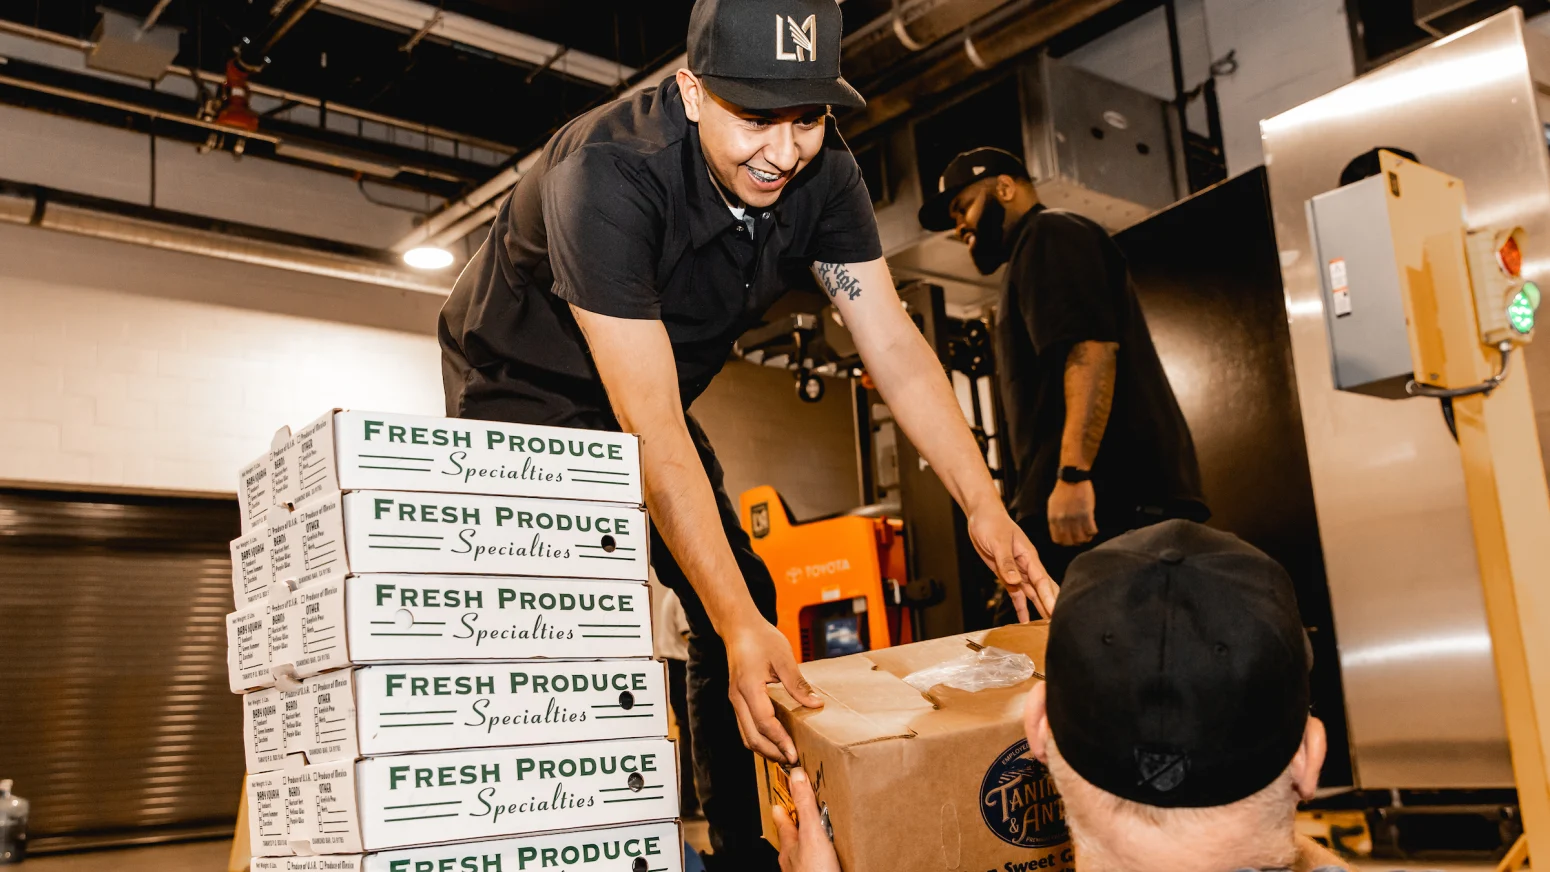 LAFC Teams With Partners To Donate Food To Local Charity